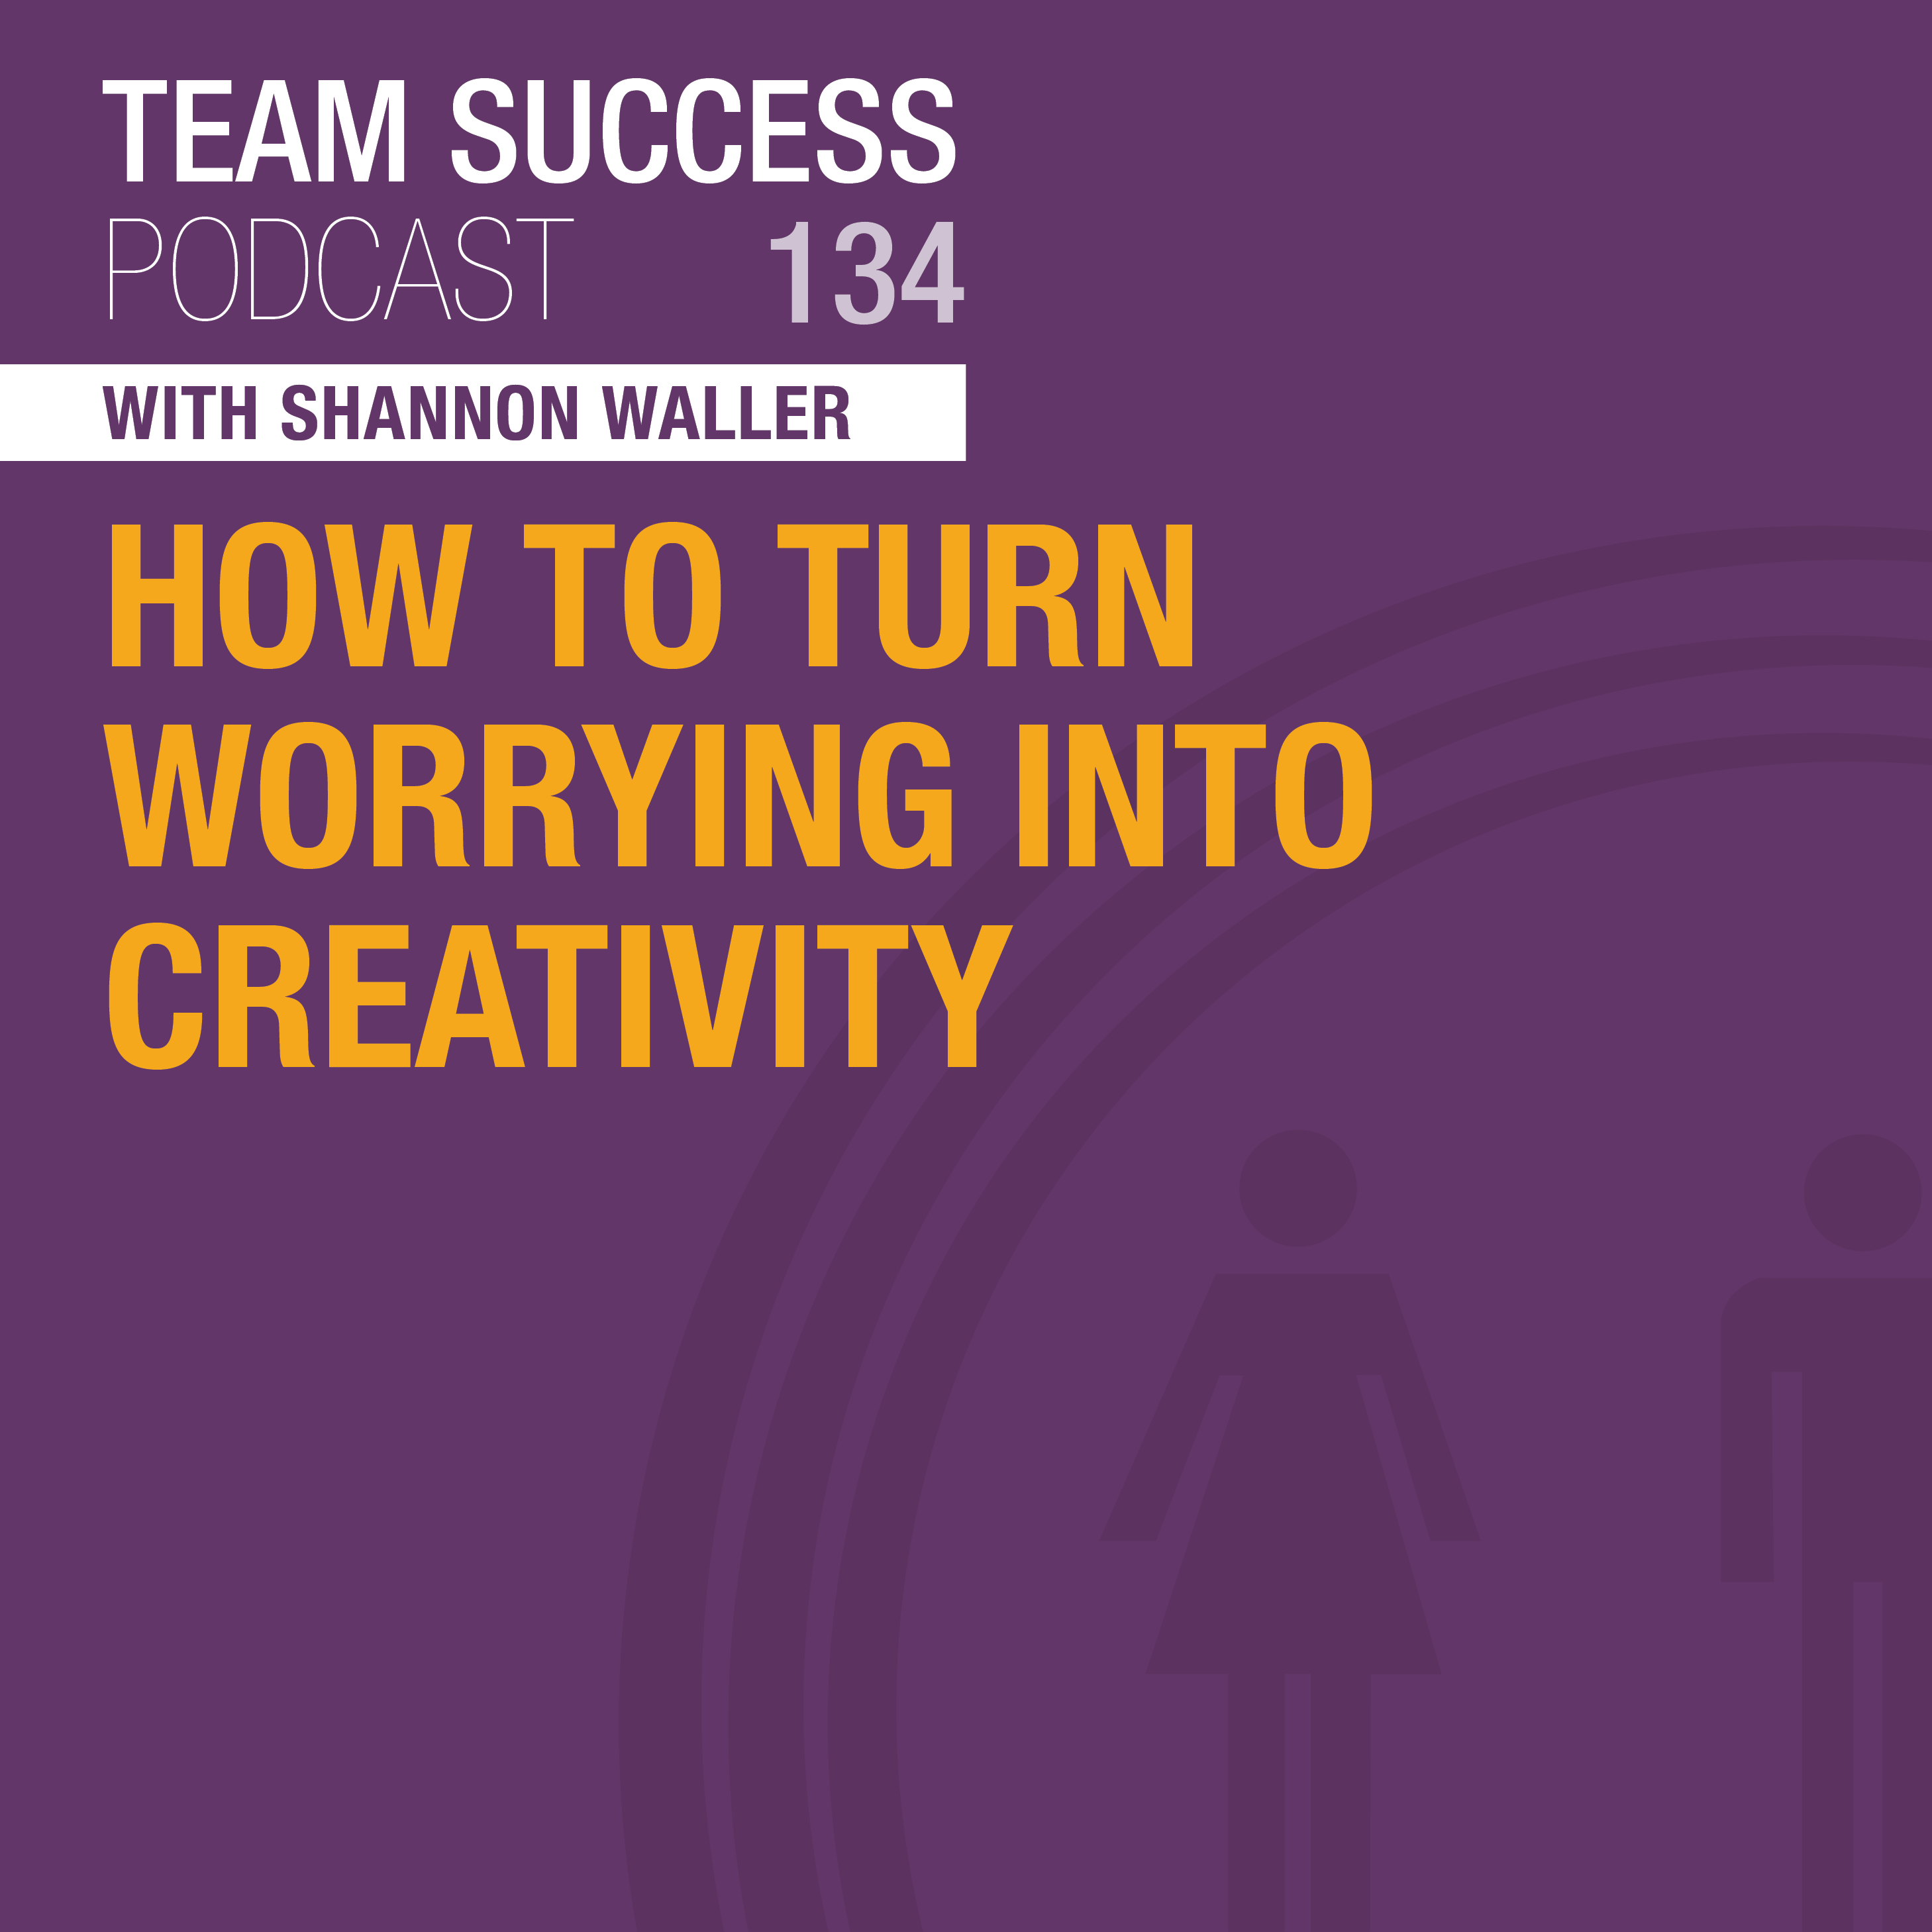 Team Success Podcast How To Turn Worrying Into Creativity